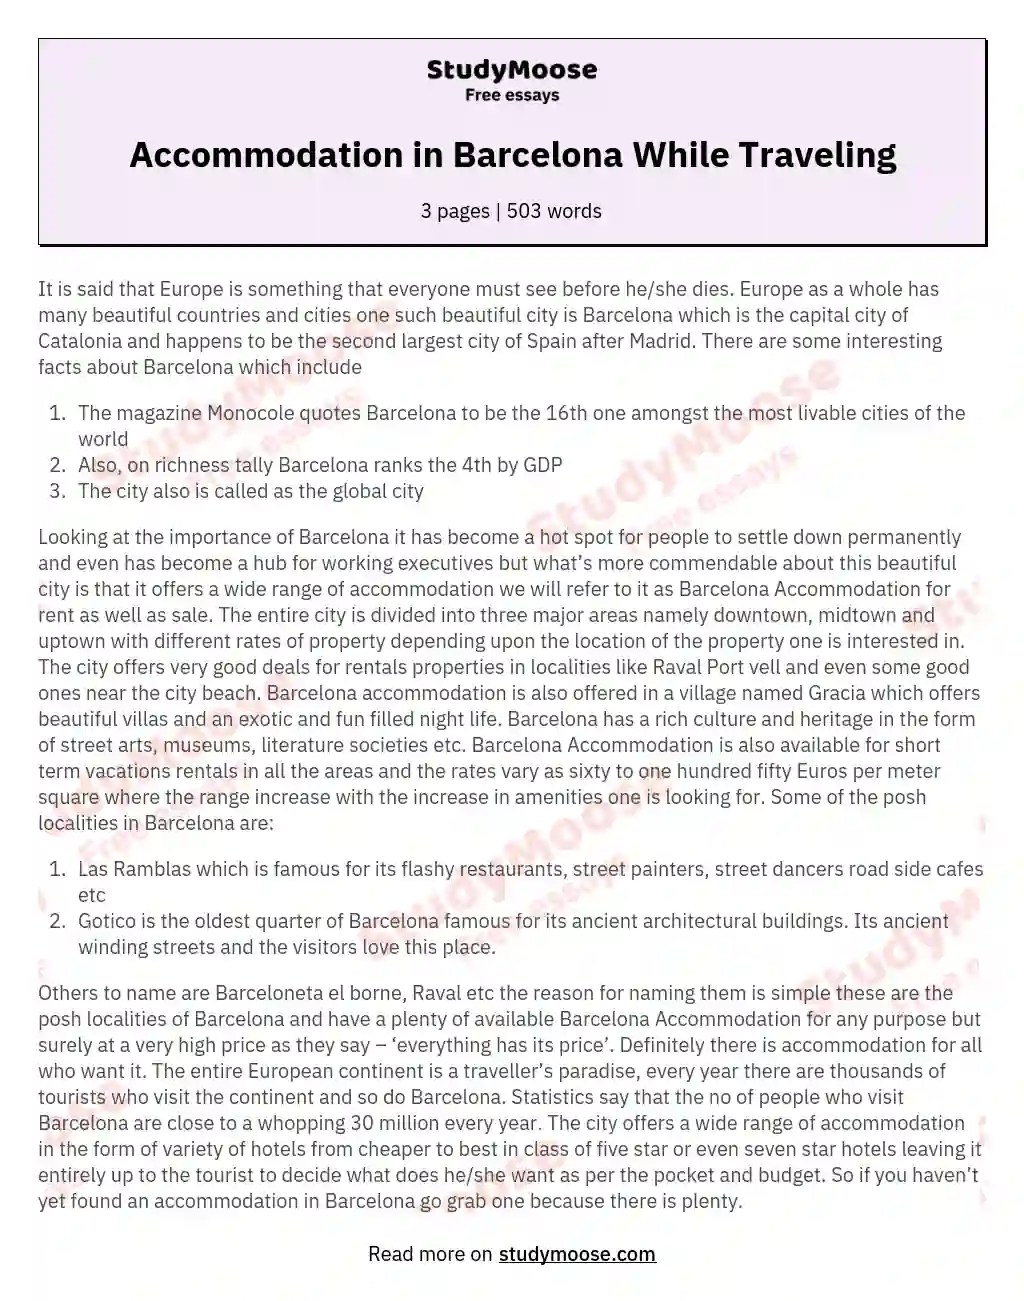 Accommodation in Barcelona While Traveling essay